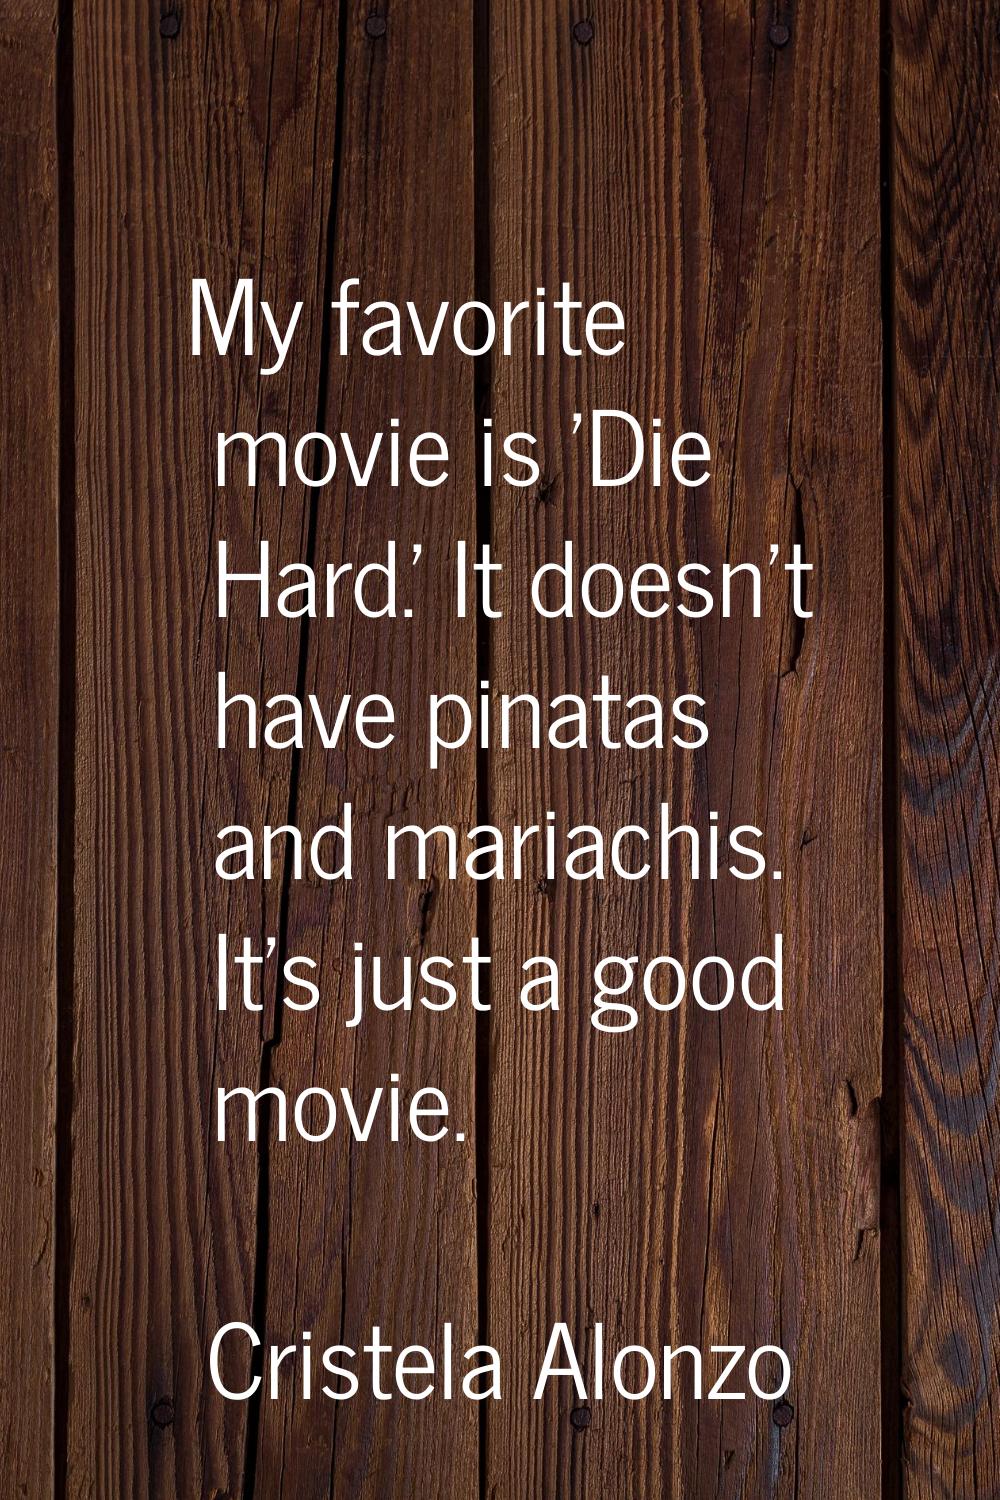 My favorite movie is 'Die Hard.' It doesn't have pinatas and mariachis. It's just a good movie.